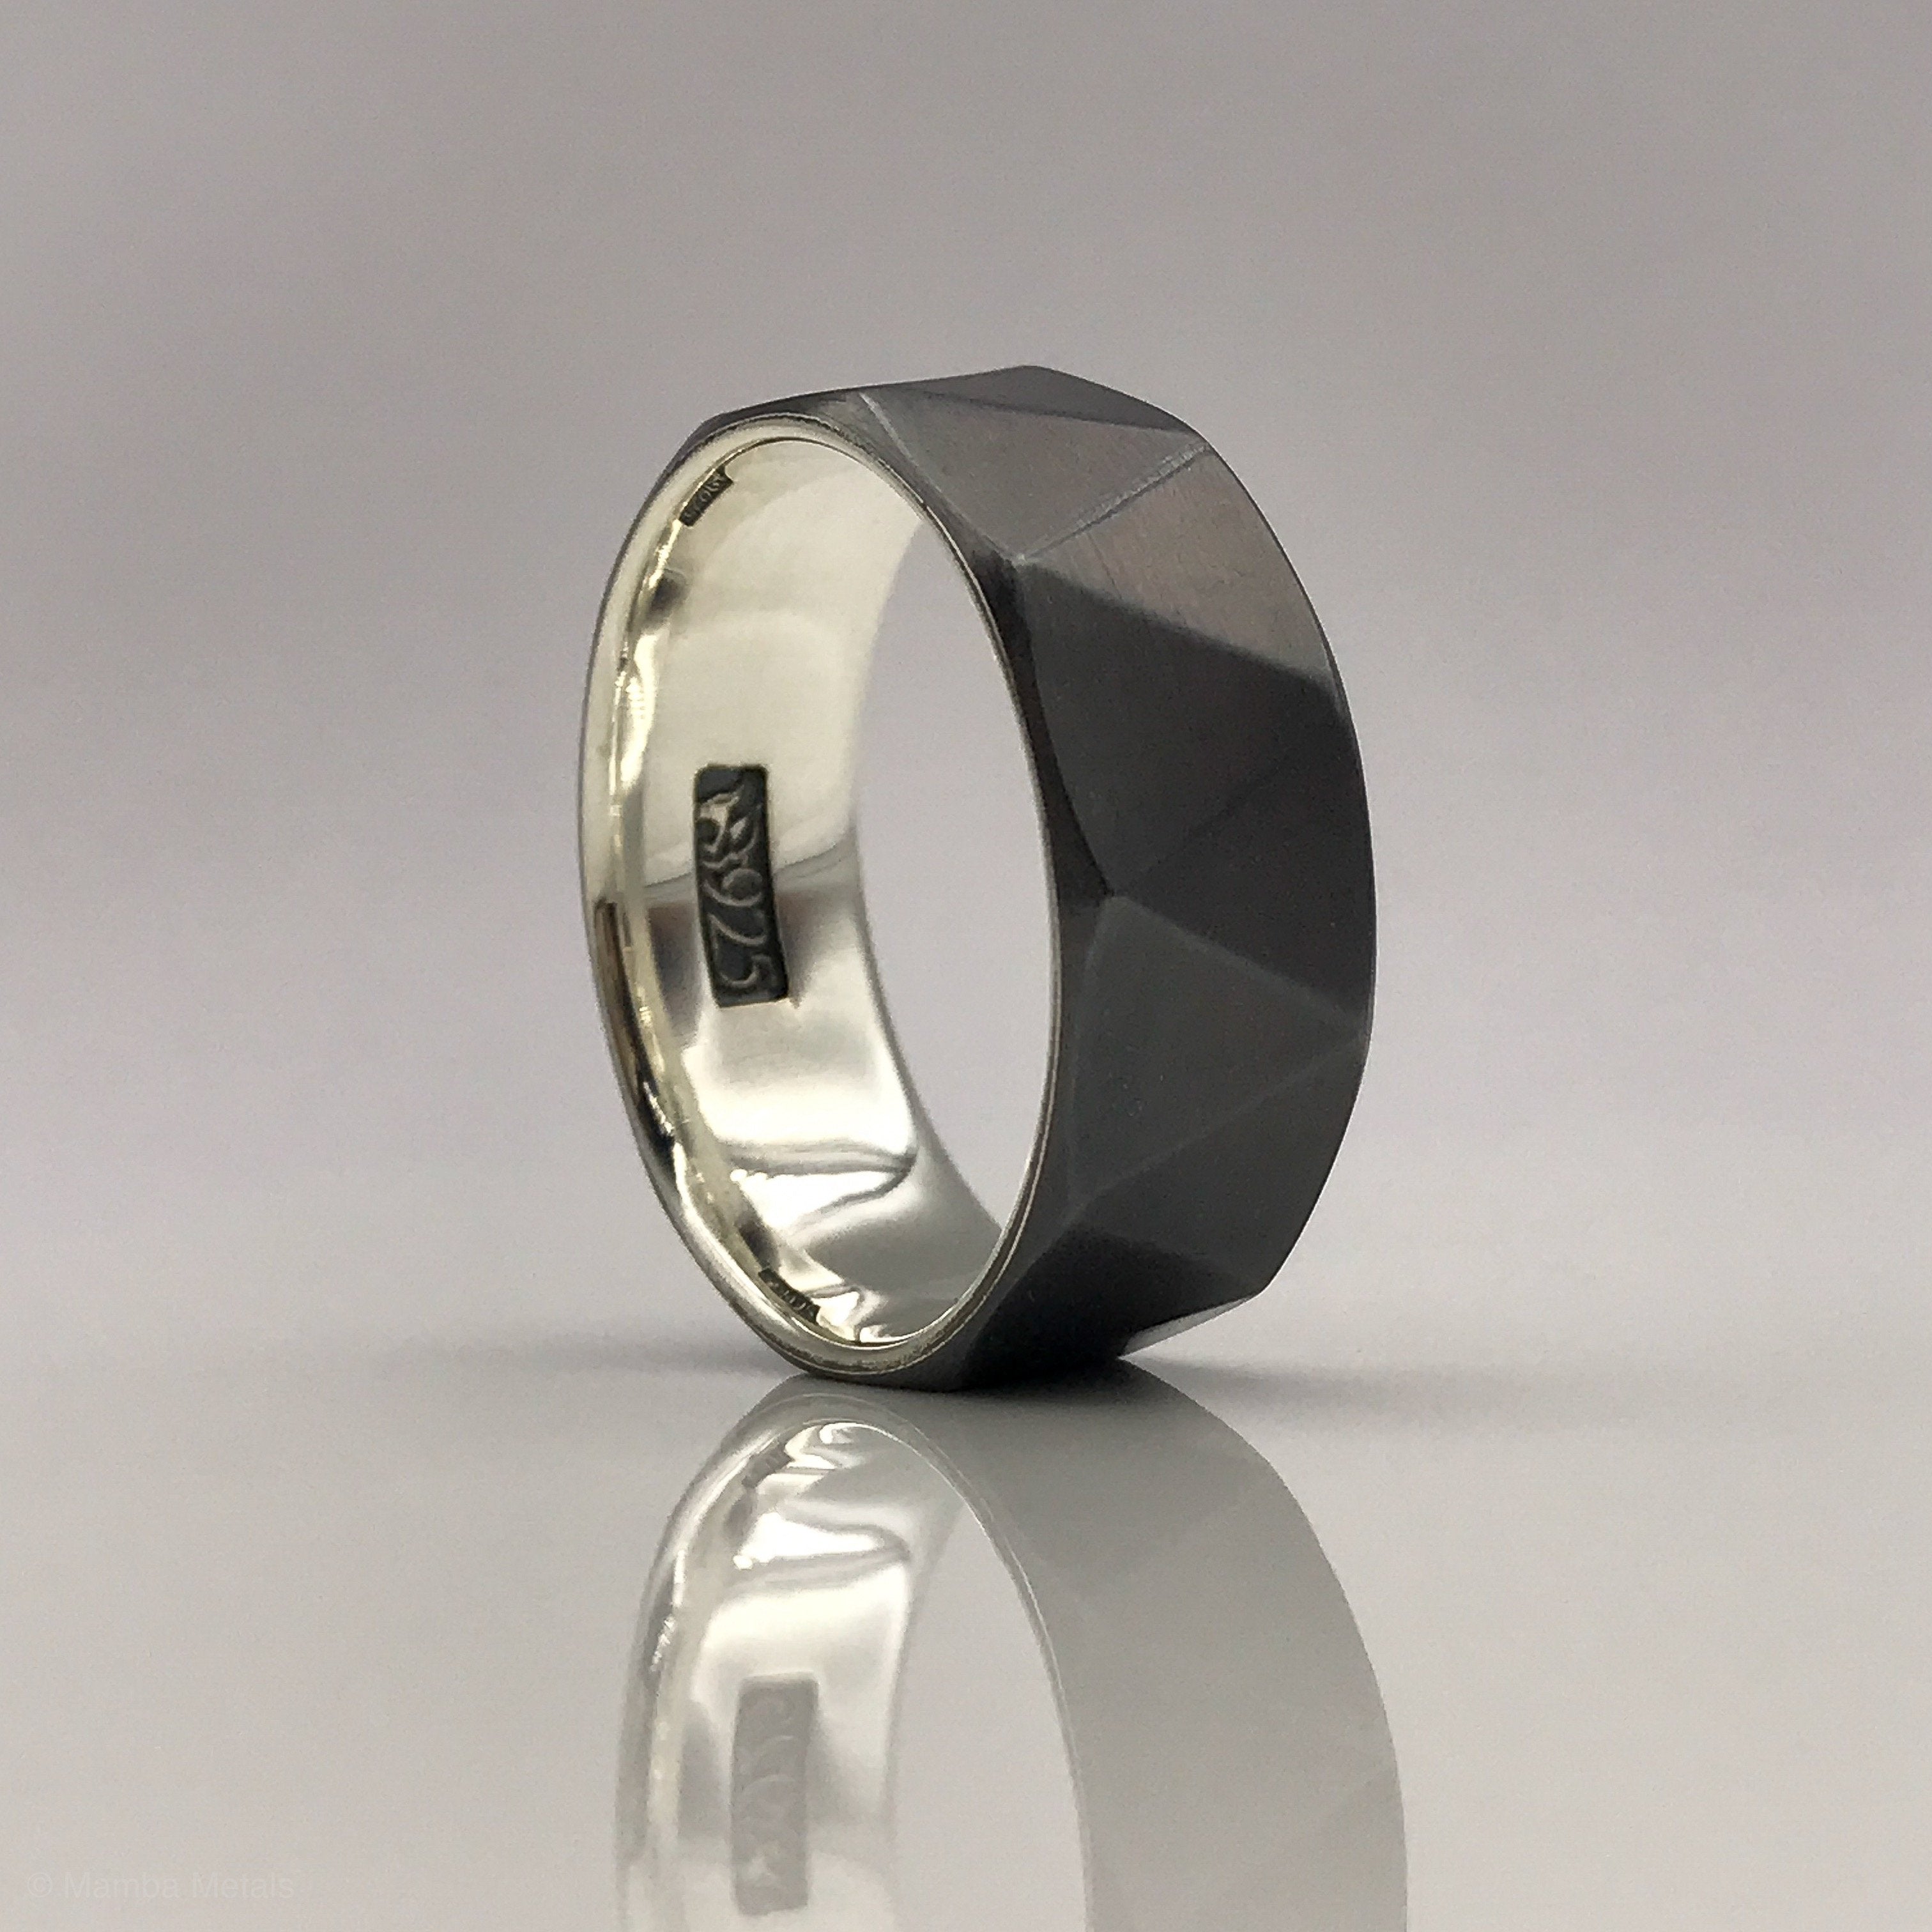 Bermuda -  Faceted Sterling Silver Ring